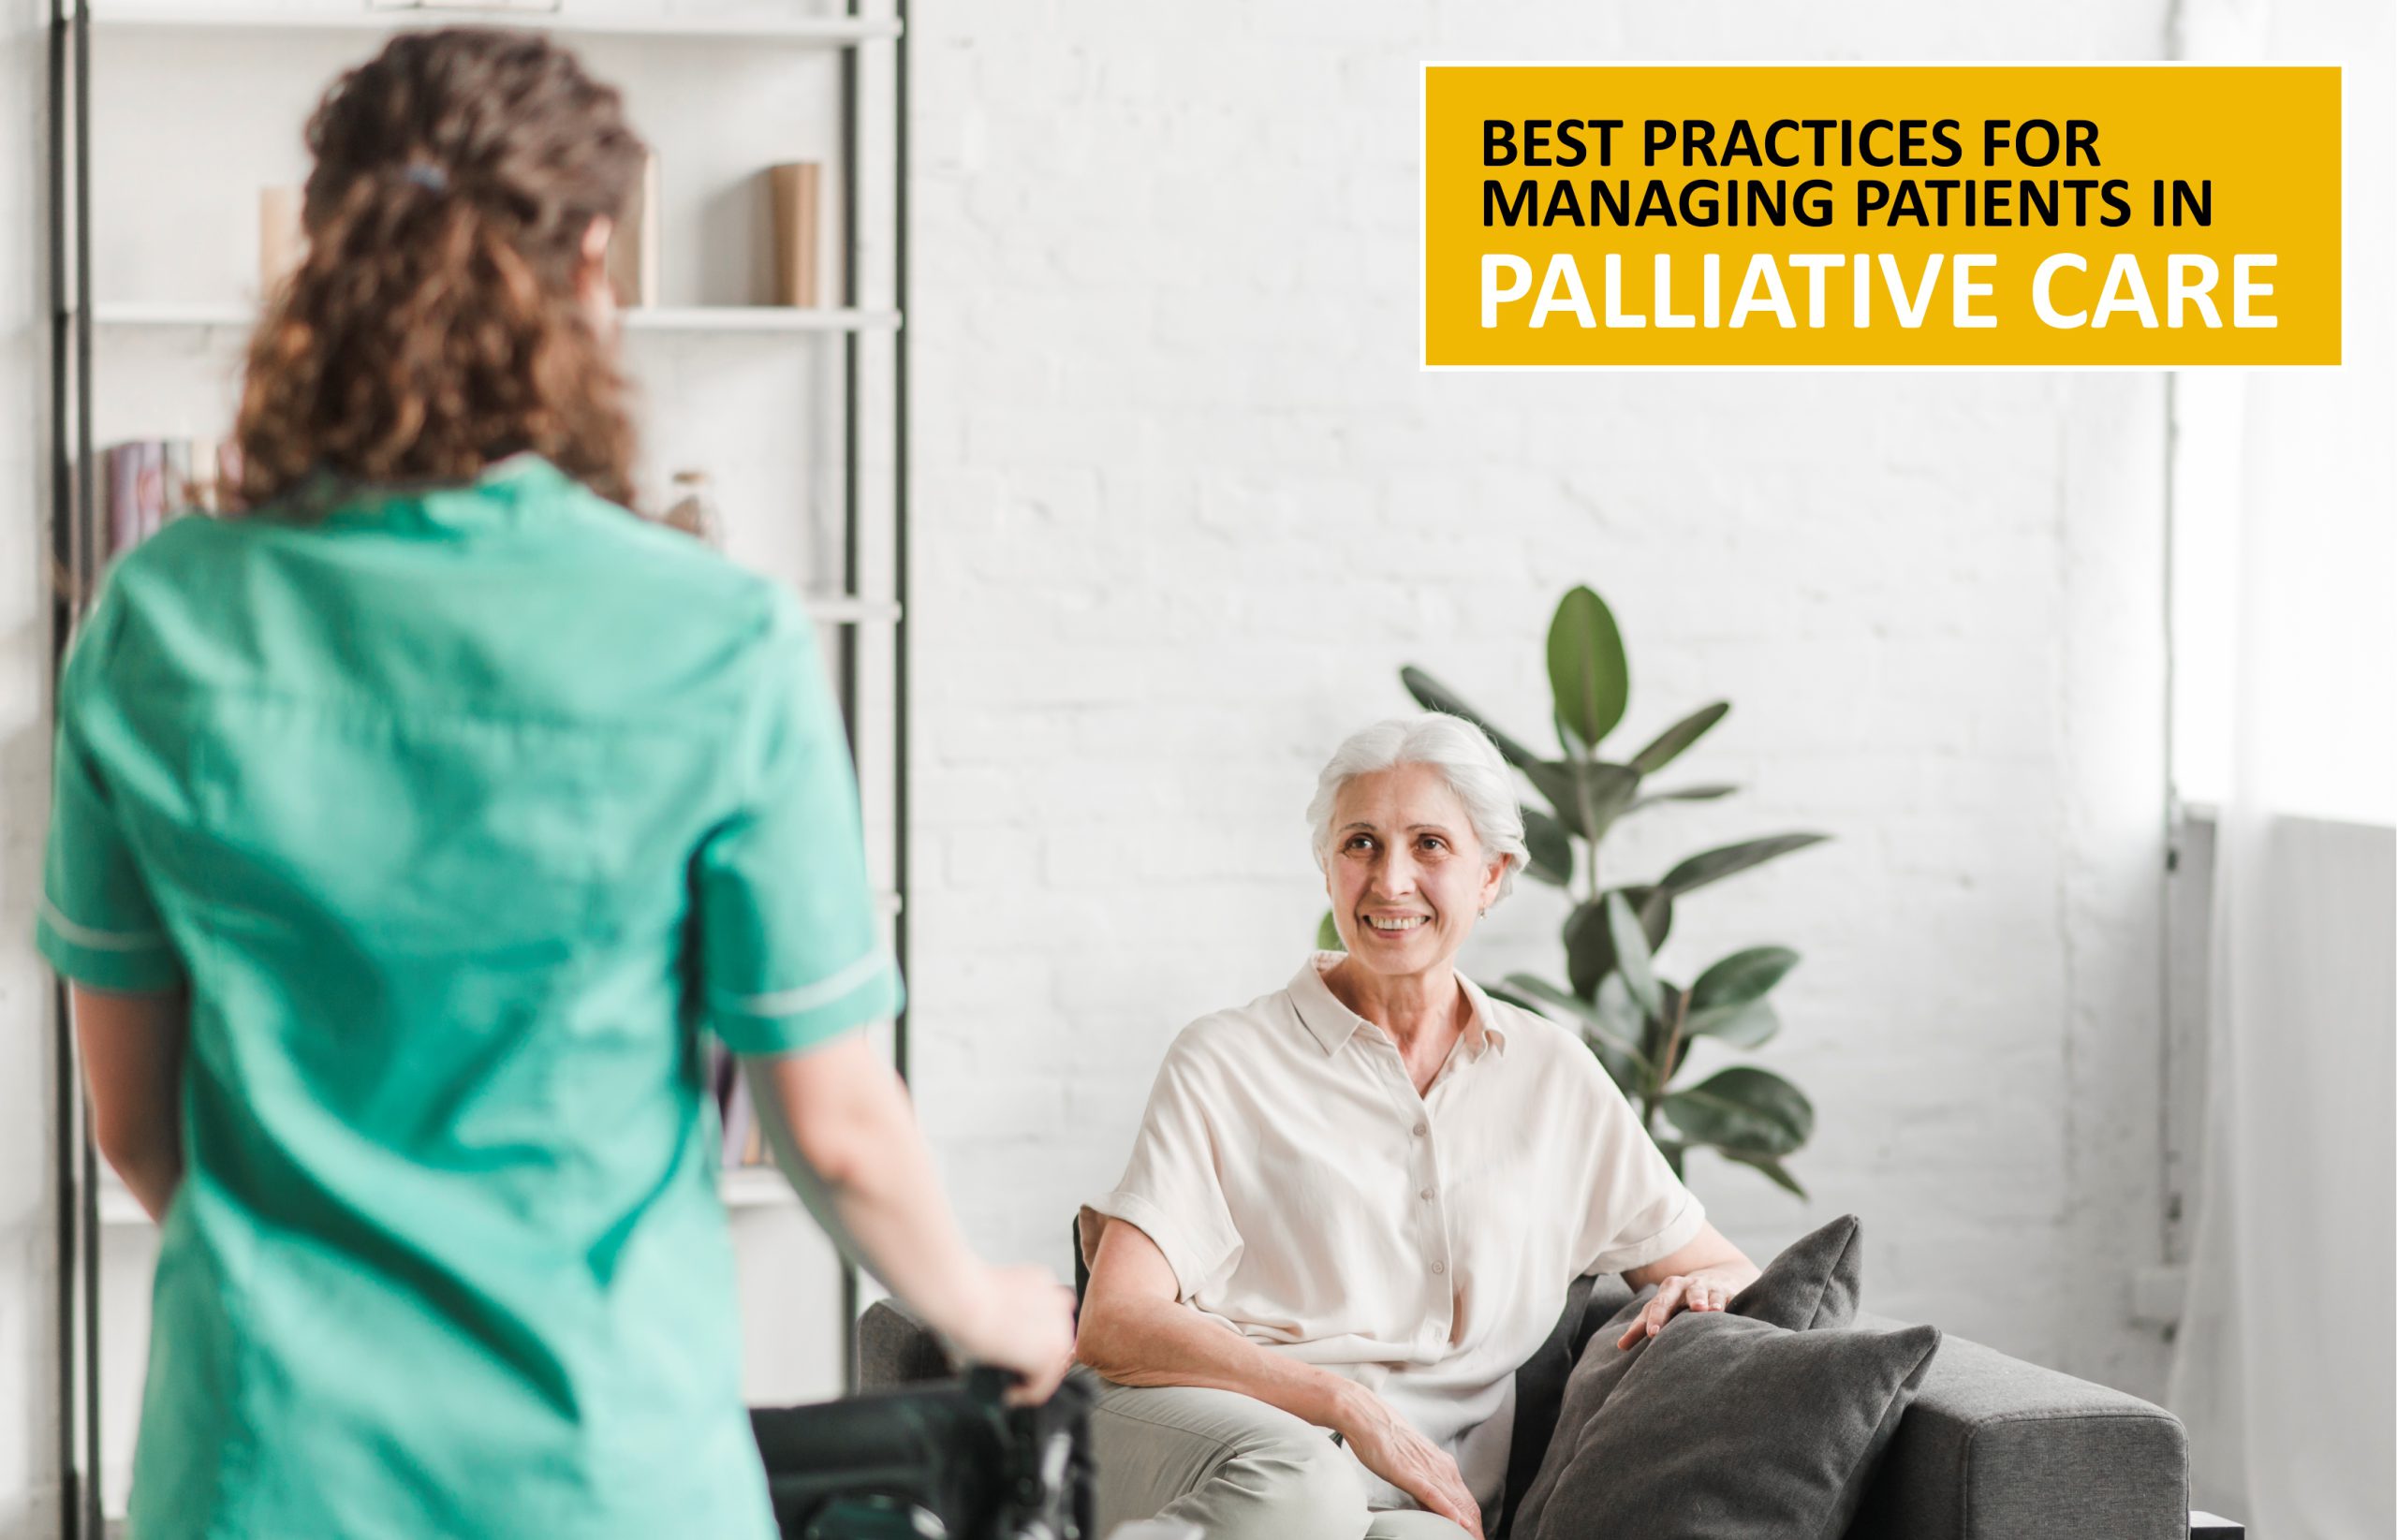 Best Practices for Managing Patients in Palliative Care